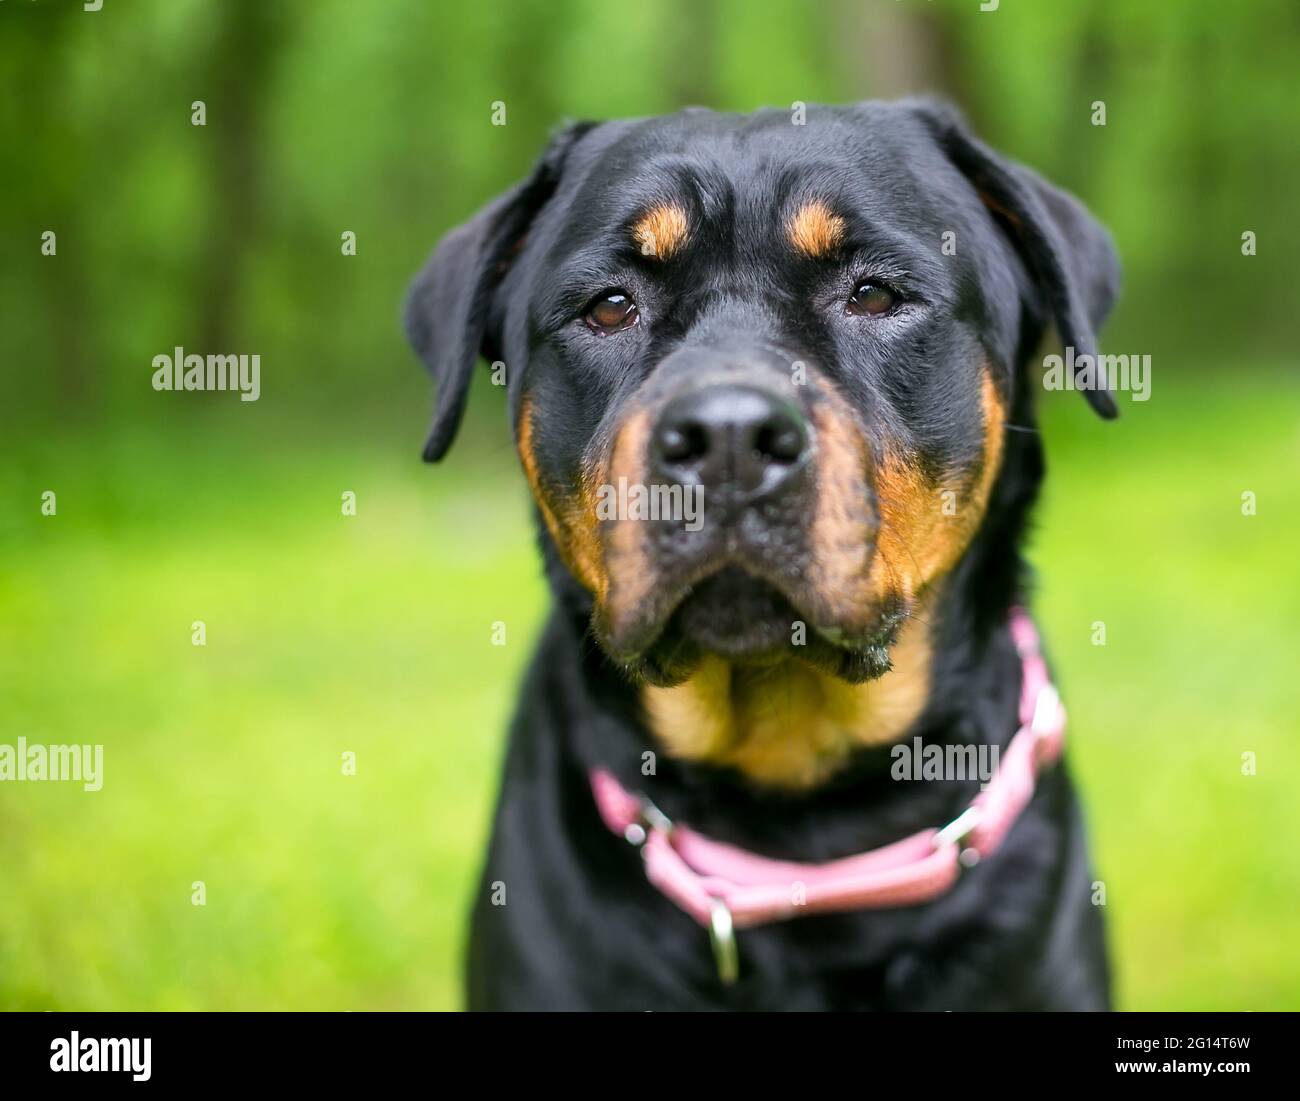 A purebred Rottweiler dog wearing a pink collar outdoors Stock Photo - Alamy